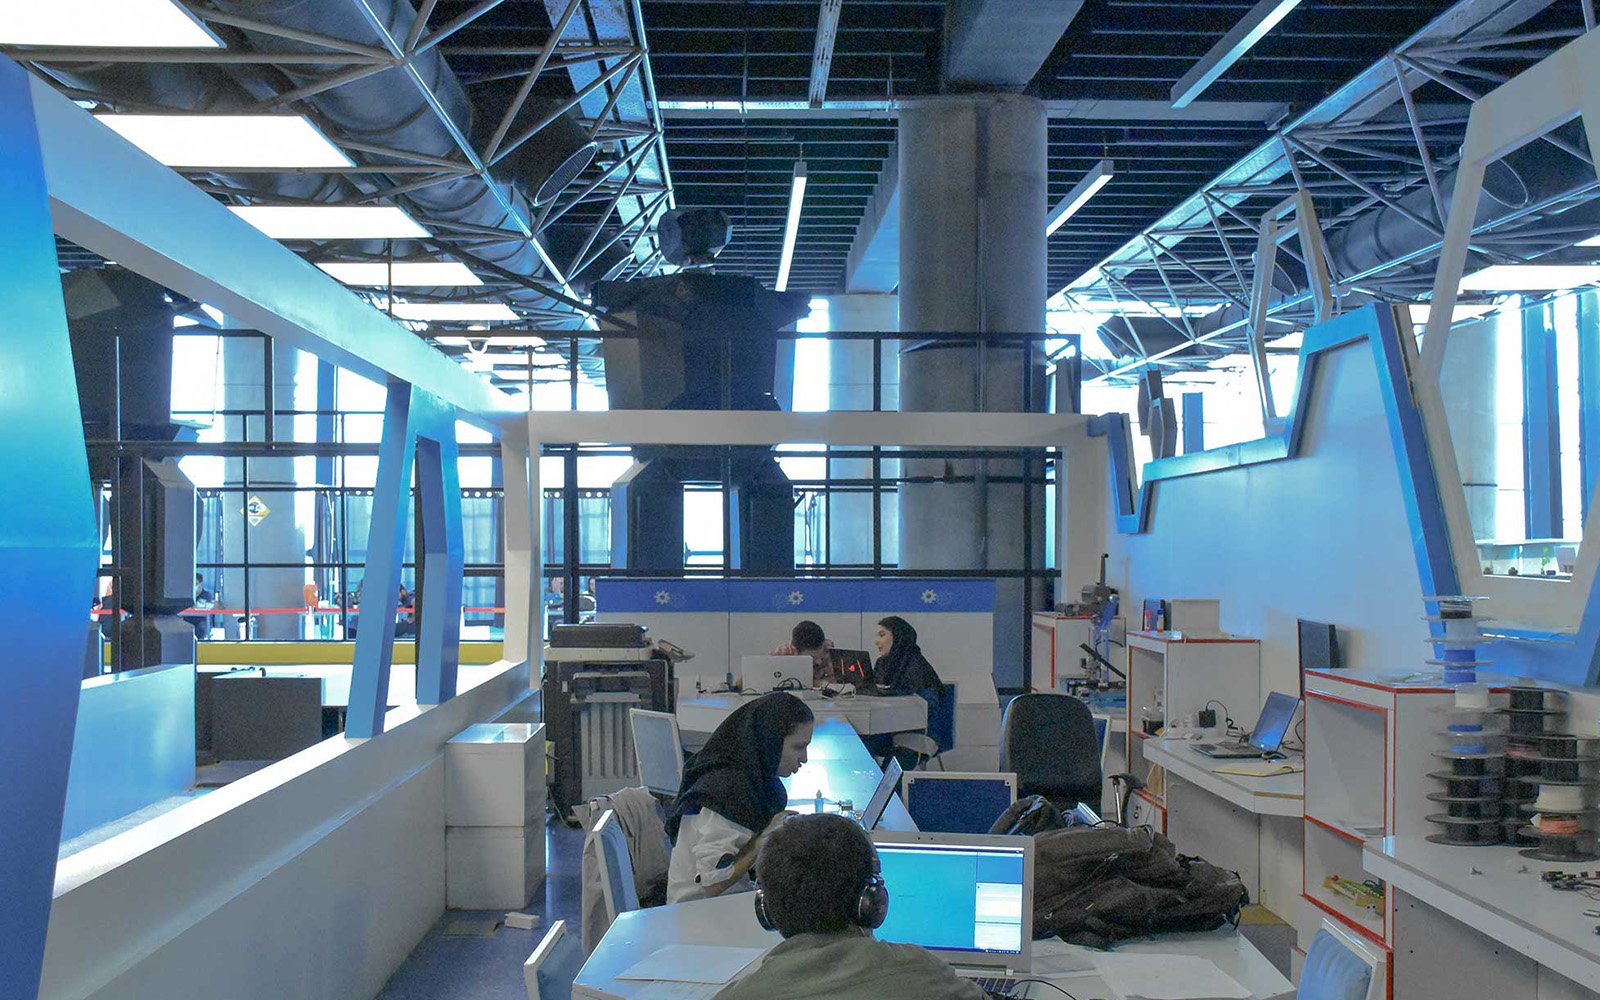 coworking space 02 01 29